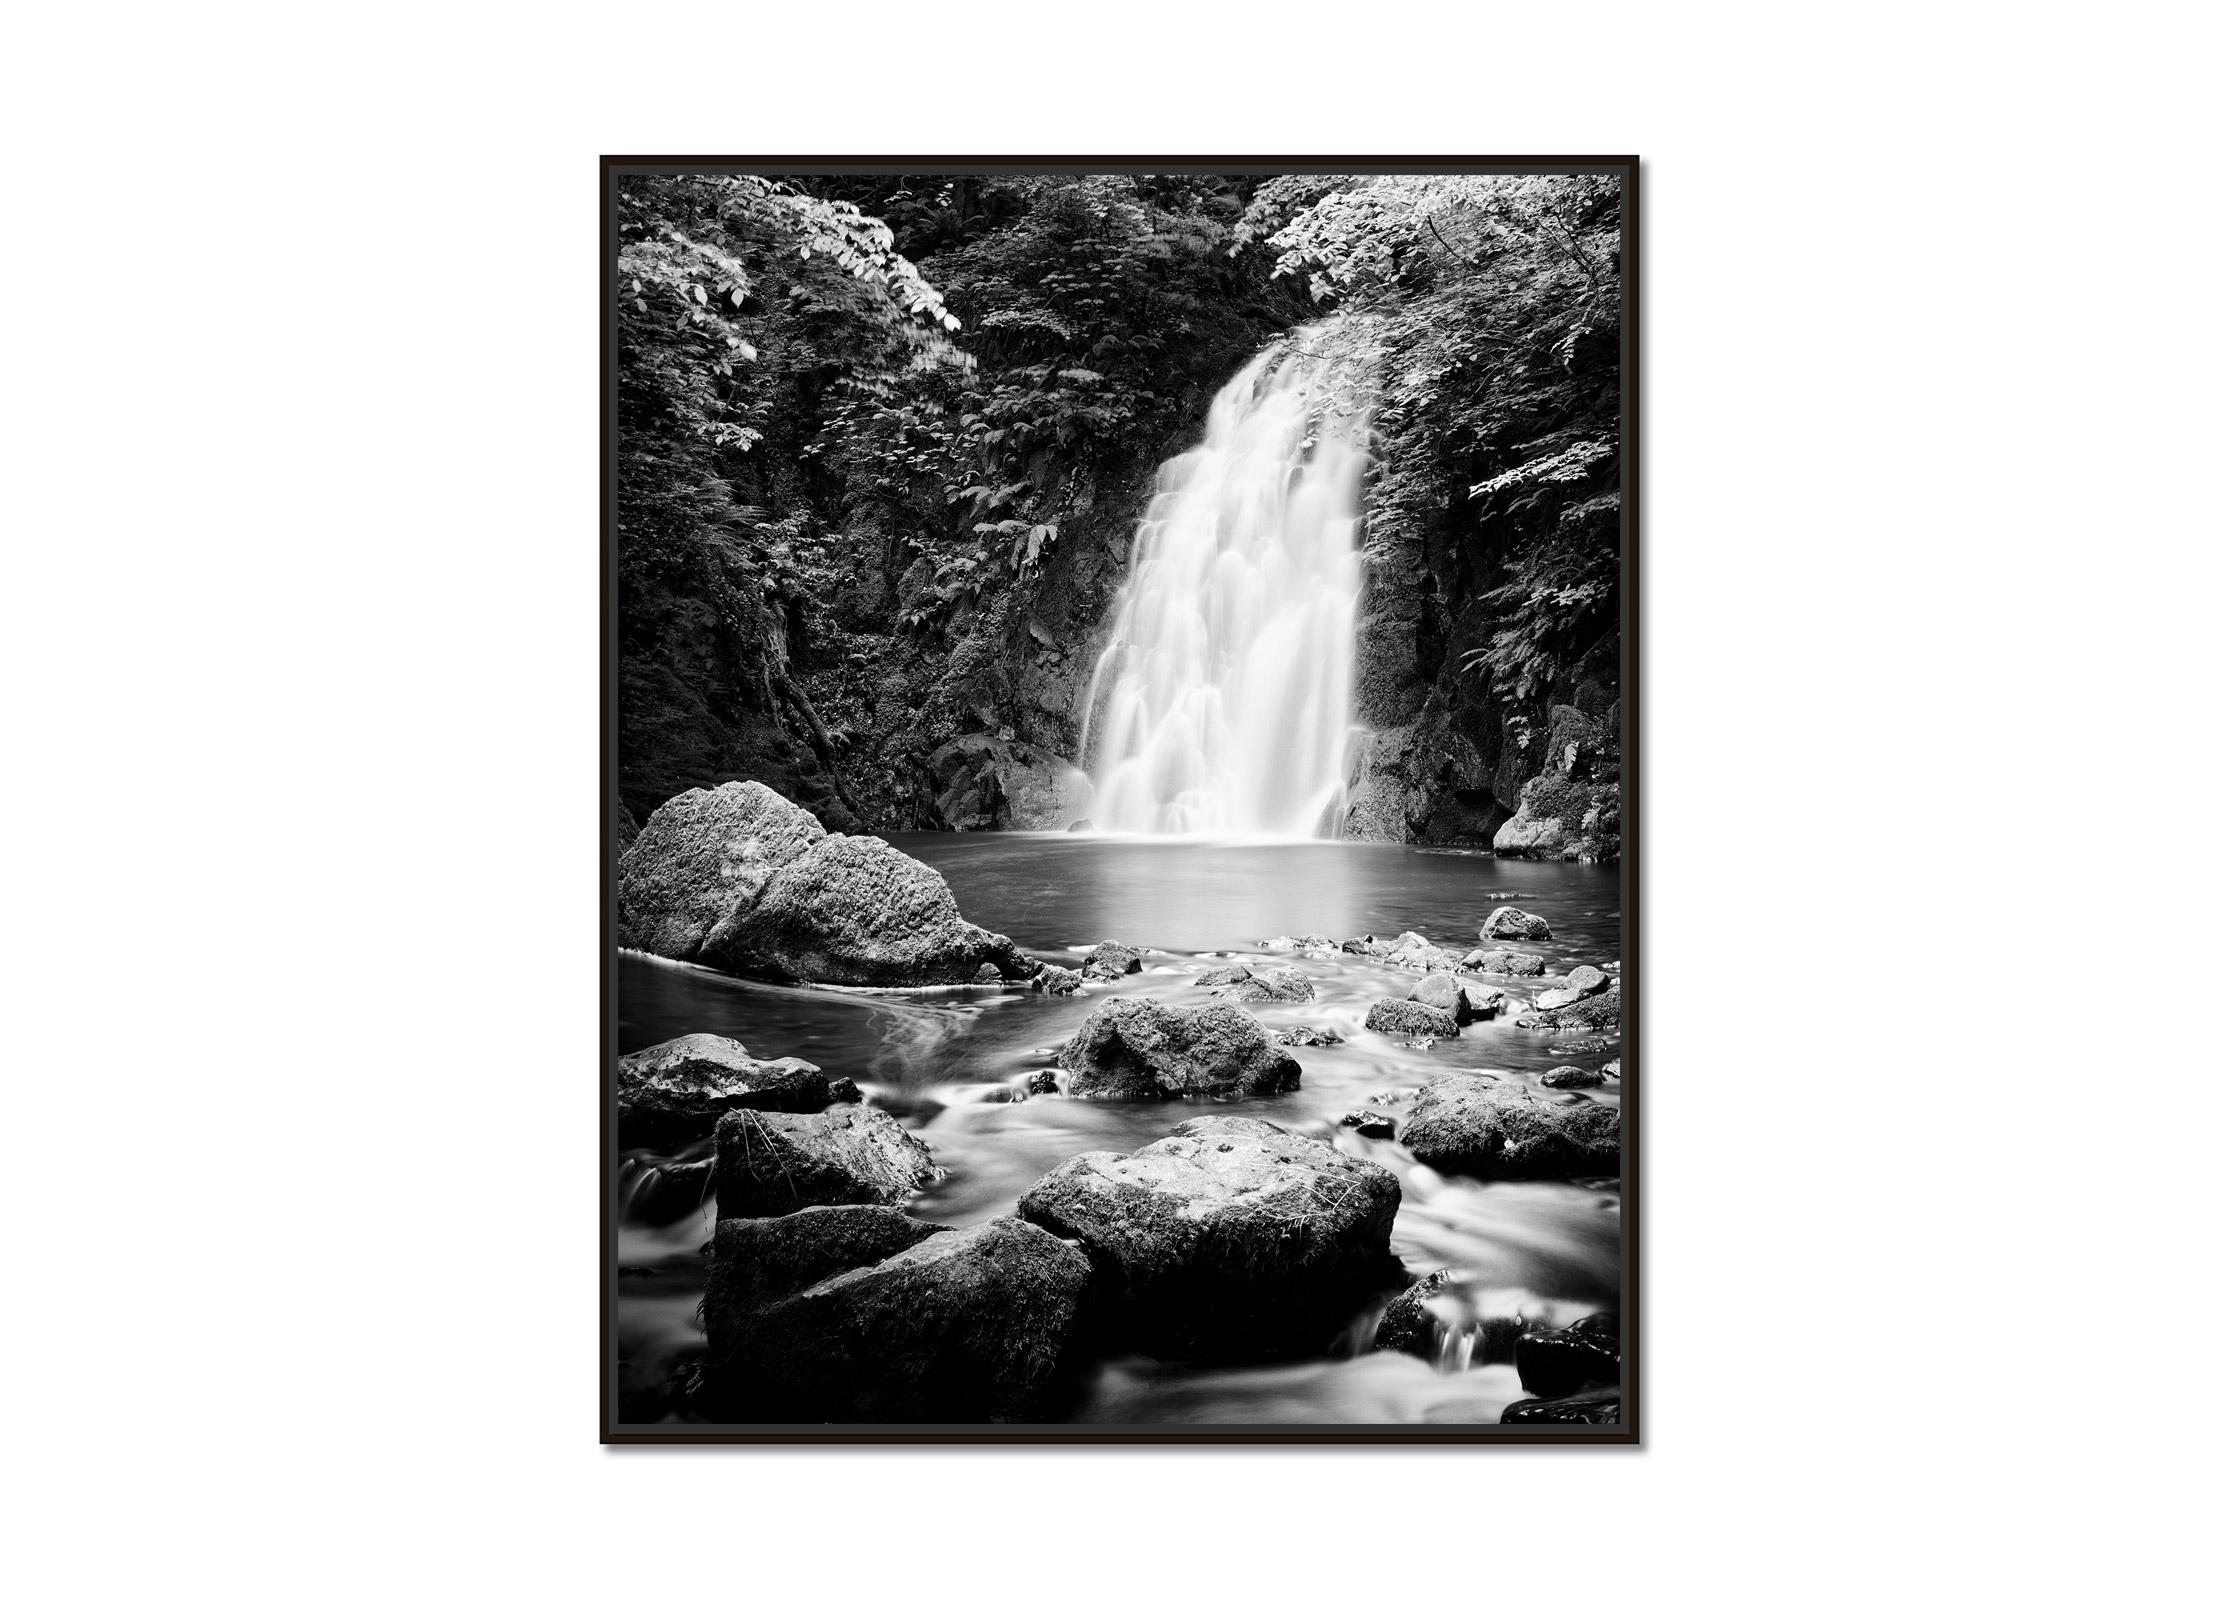 Glenoe Waterfall Ireland black and white waterscape landscape art photography - Photograph by Gerald Berghammer